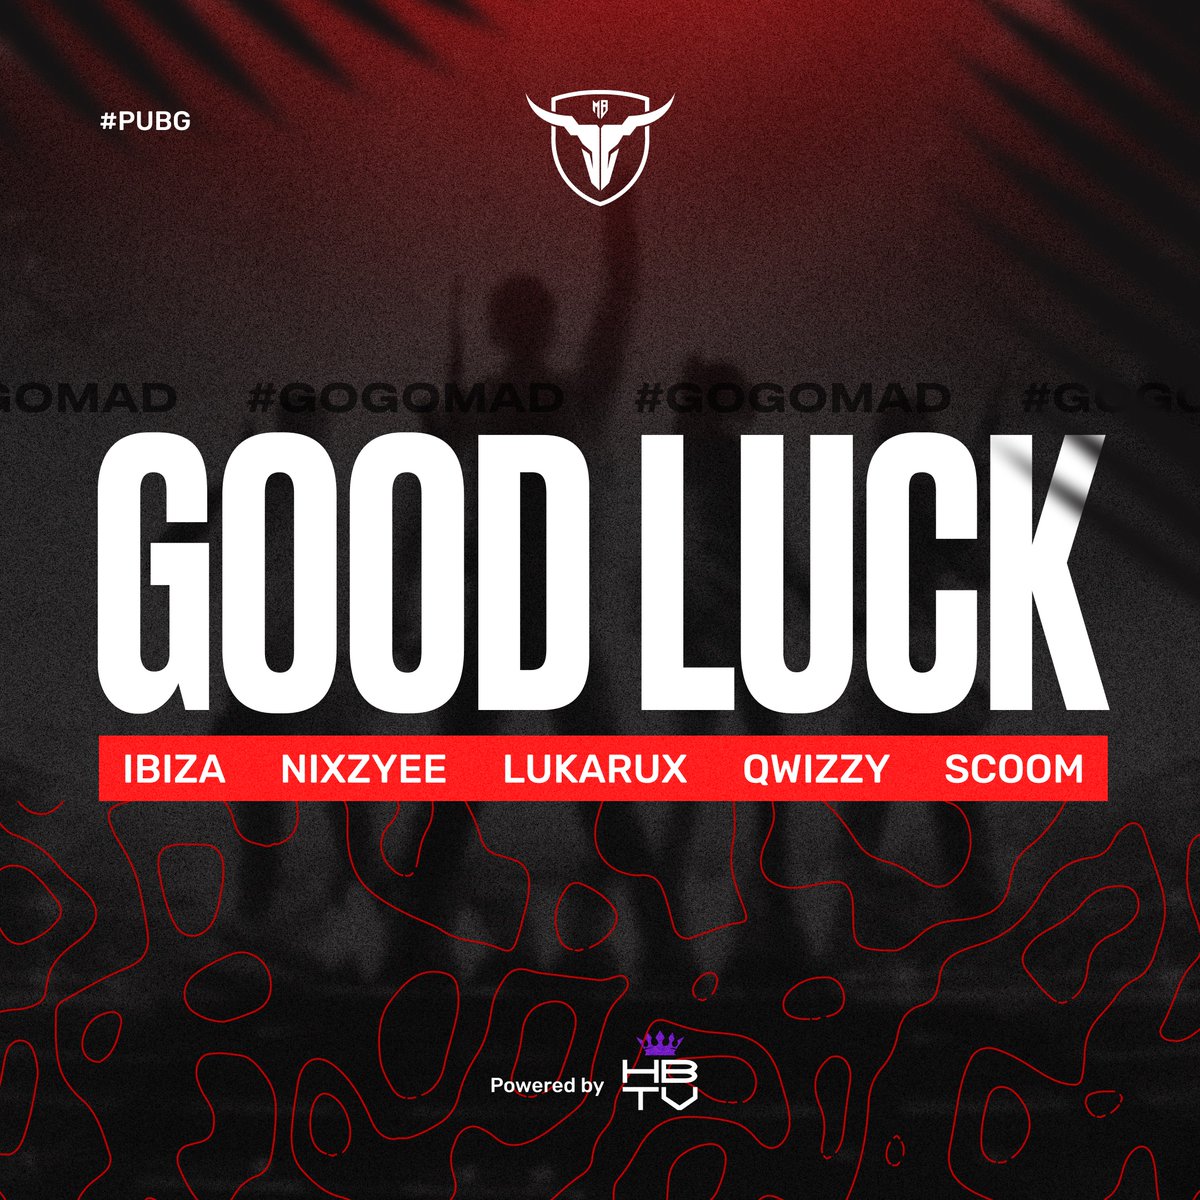 Sadly, today we have to say goodbye to our squad as they begin a new journey 🌦 🤍 We thank the guys for everything they’ve done for us - we wish you nothing but success! #PUBG #GOGOMAD